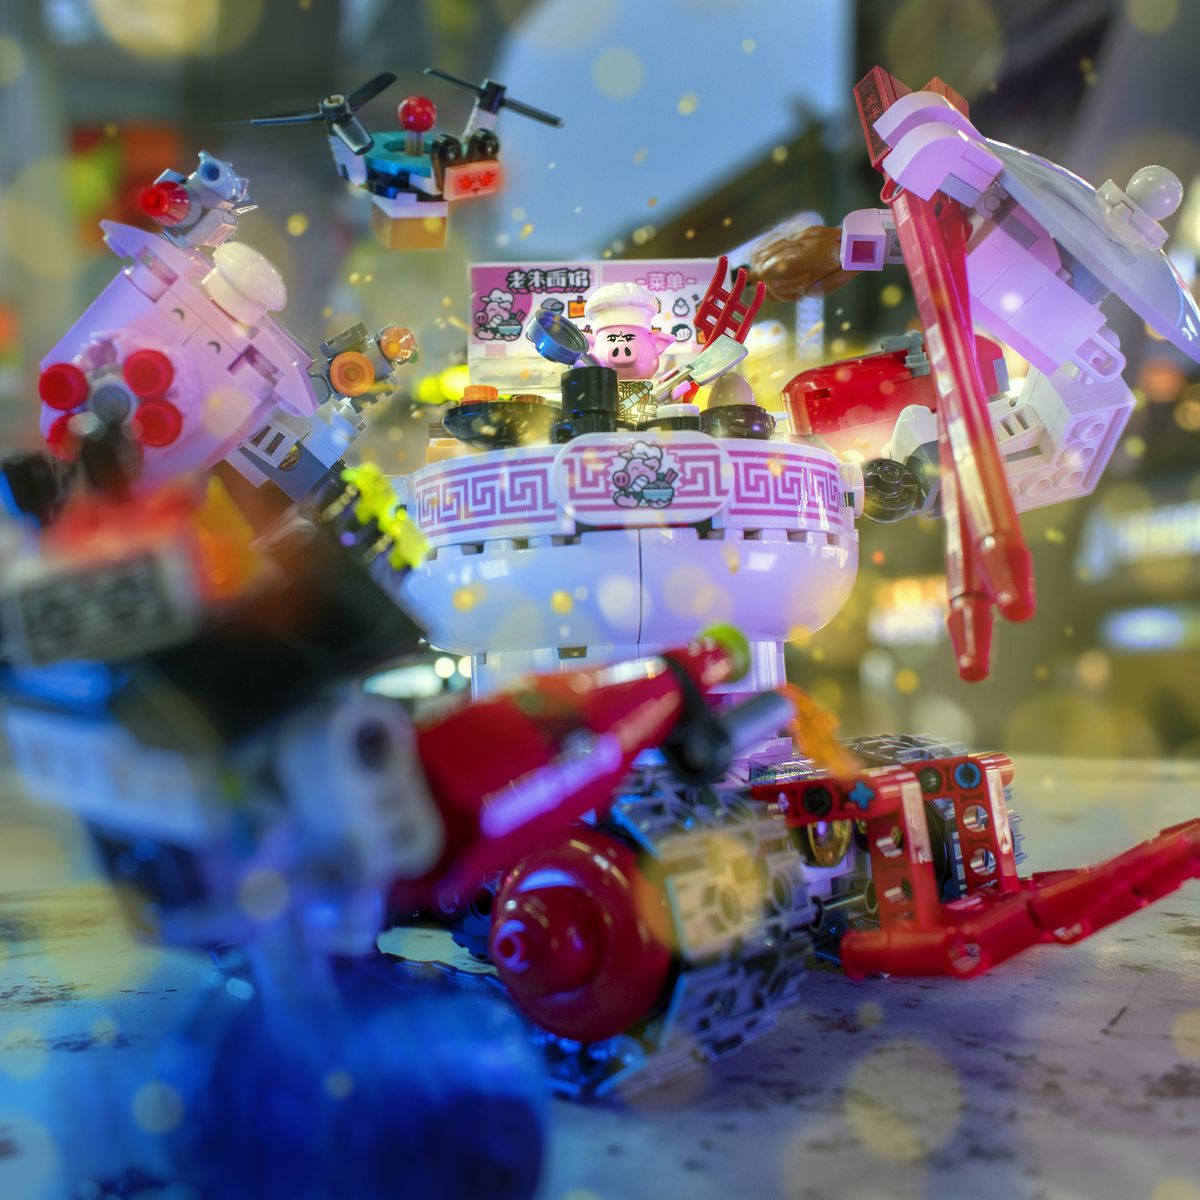 A lego pig chef works in a giant wheeled contraption built to look like a noodle bowl complete with arms wielding chopsticks and drone sidekick